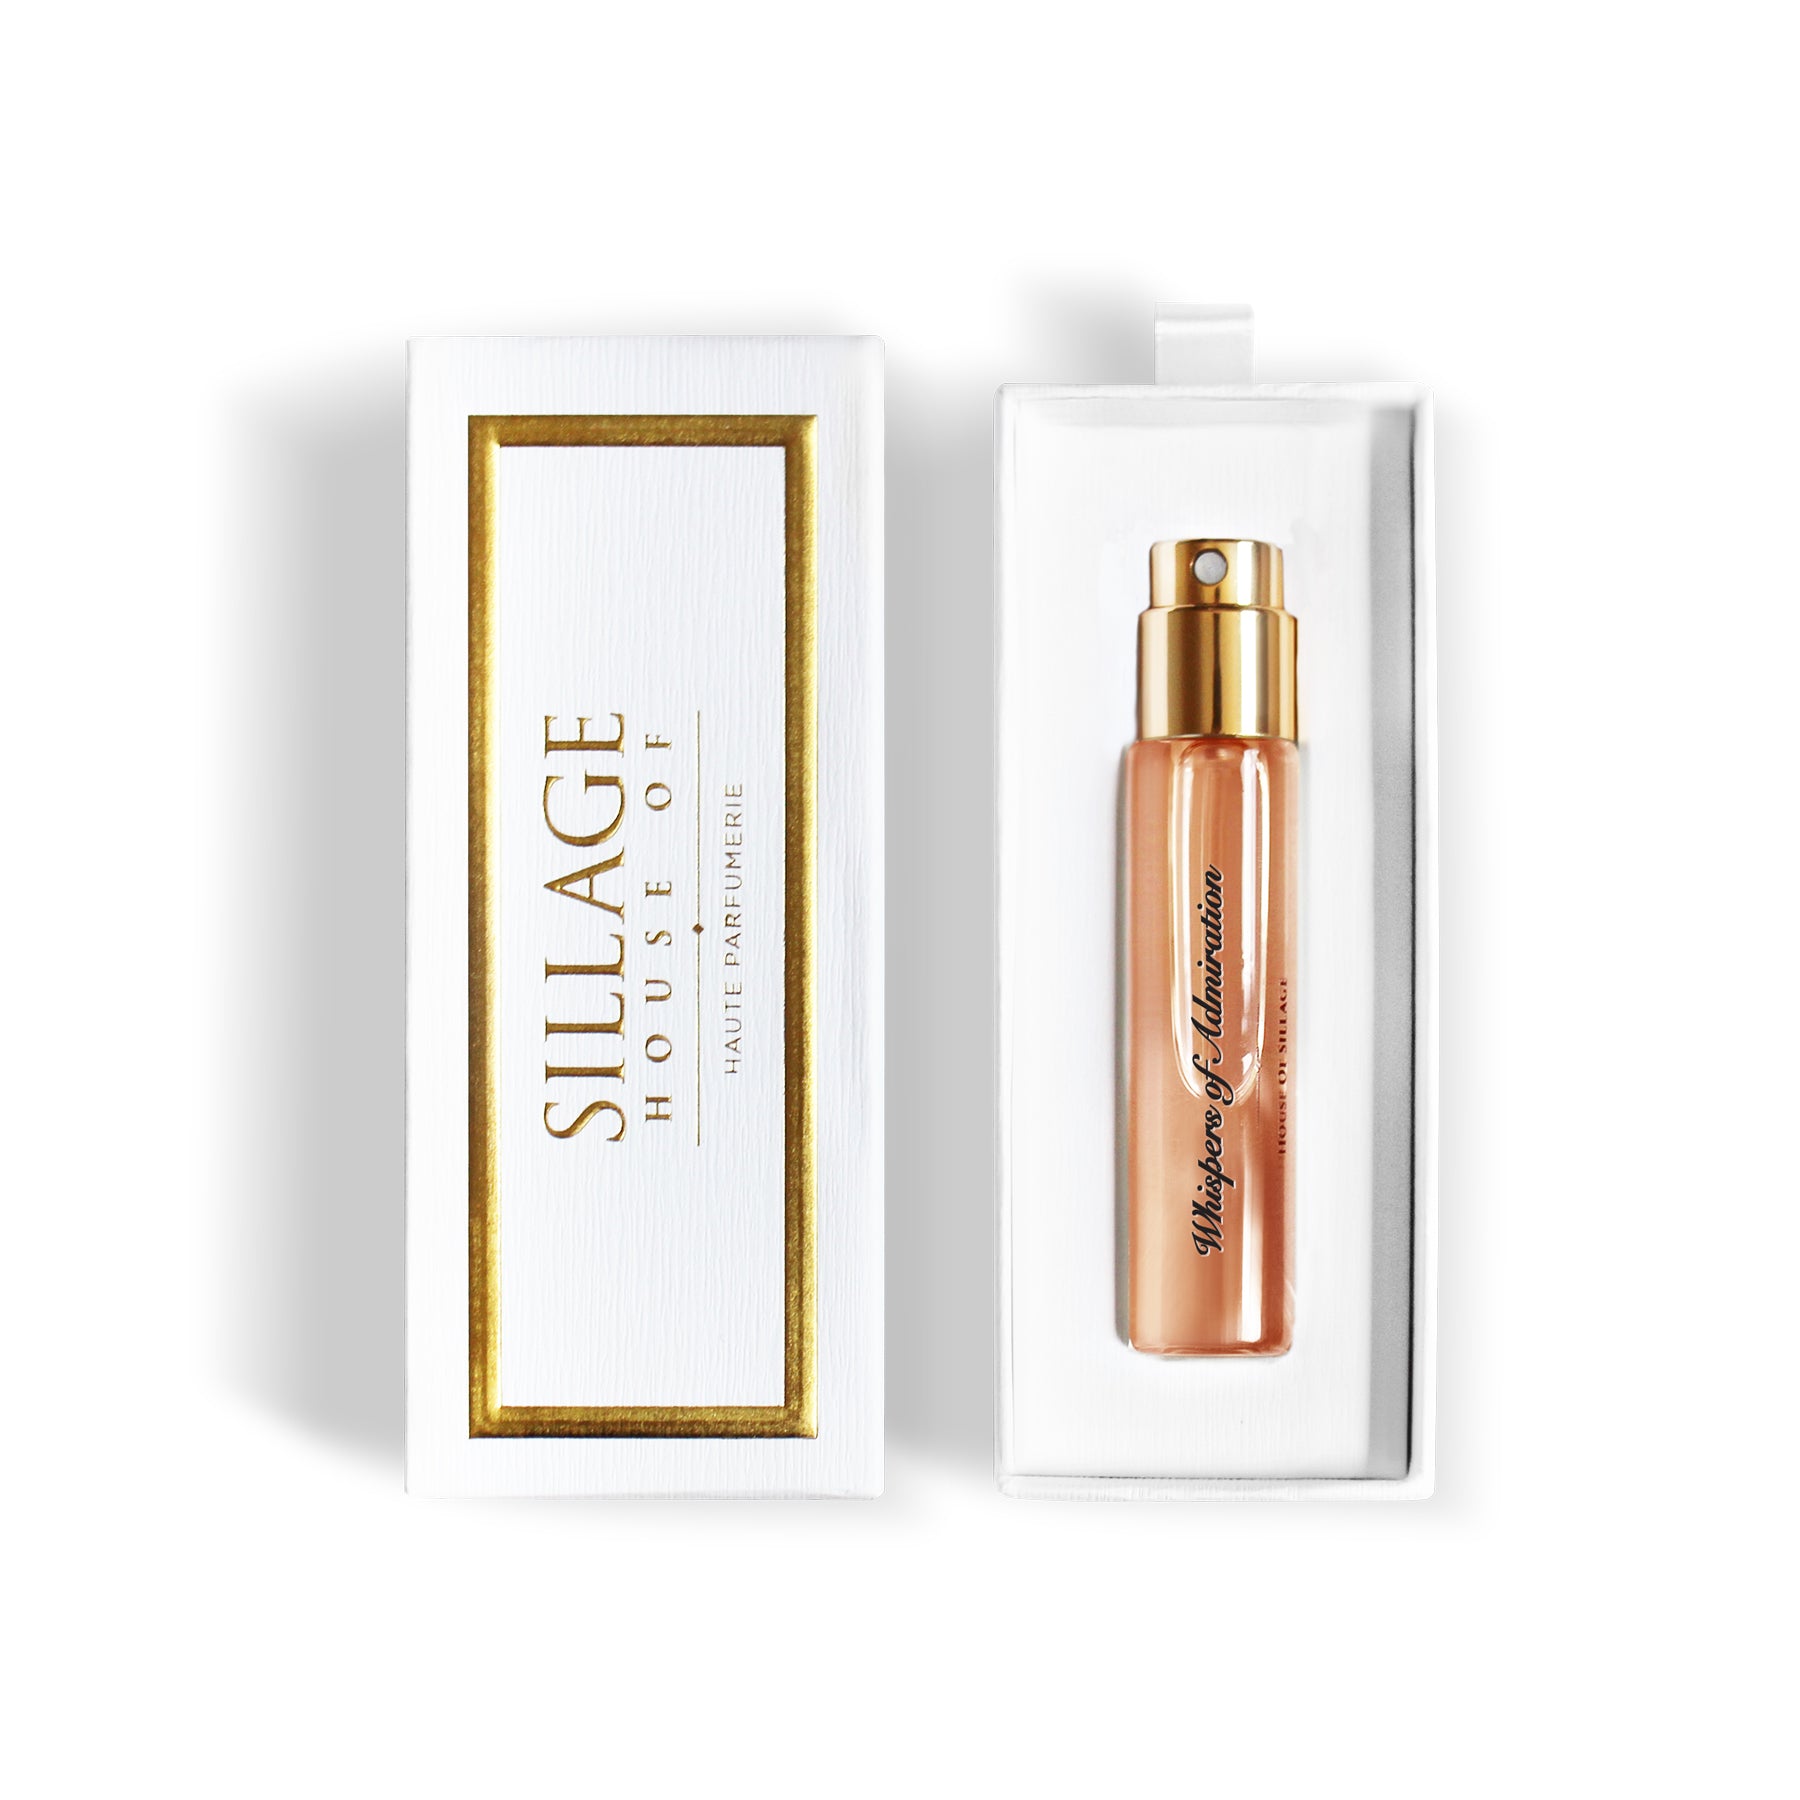 Whispers of Admiration Parfum Travel Spray – House of Sillage